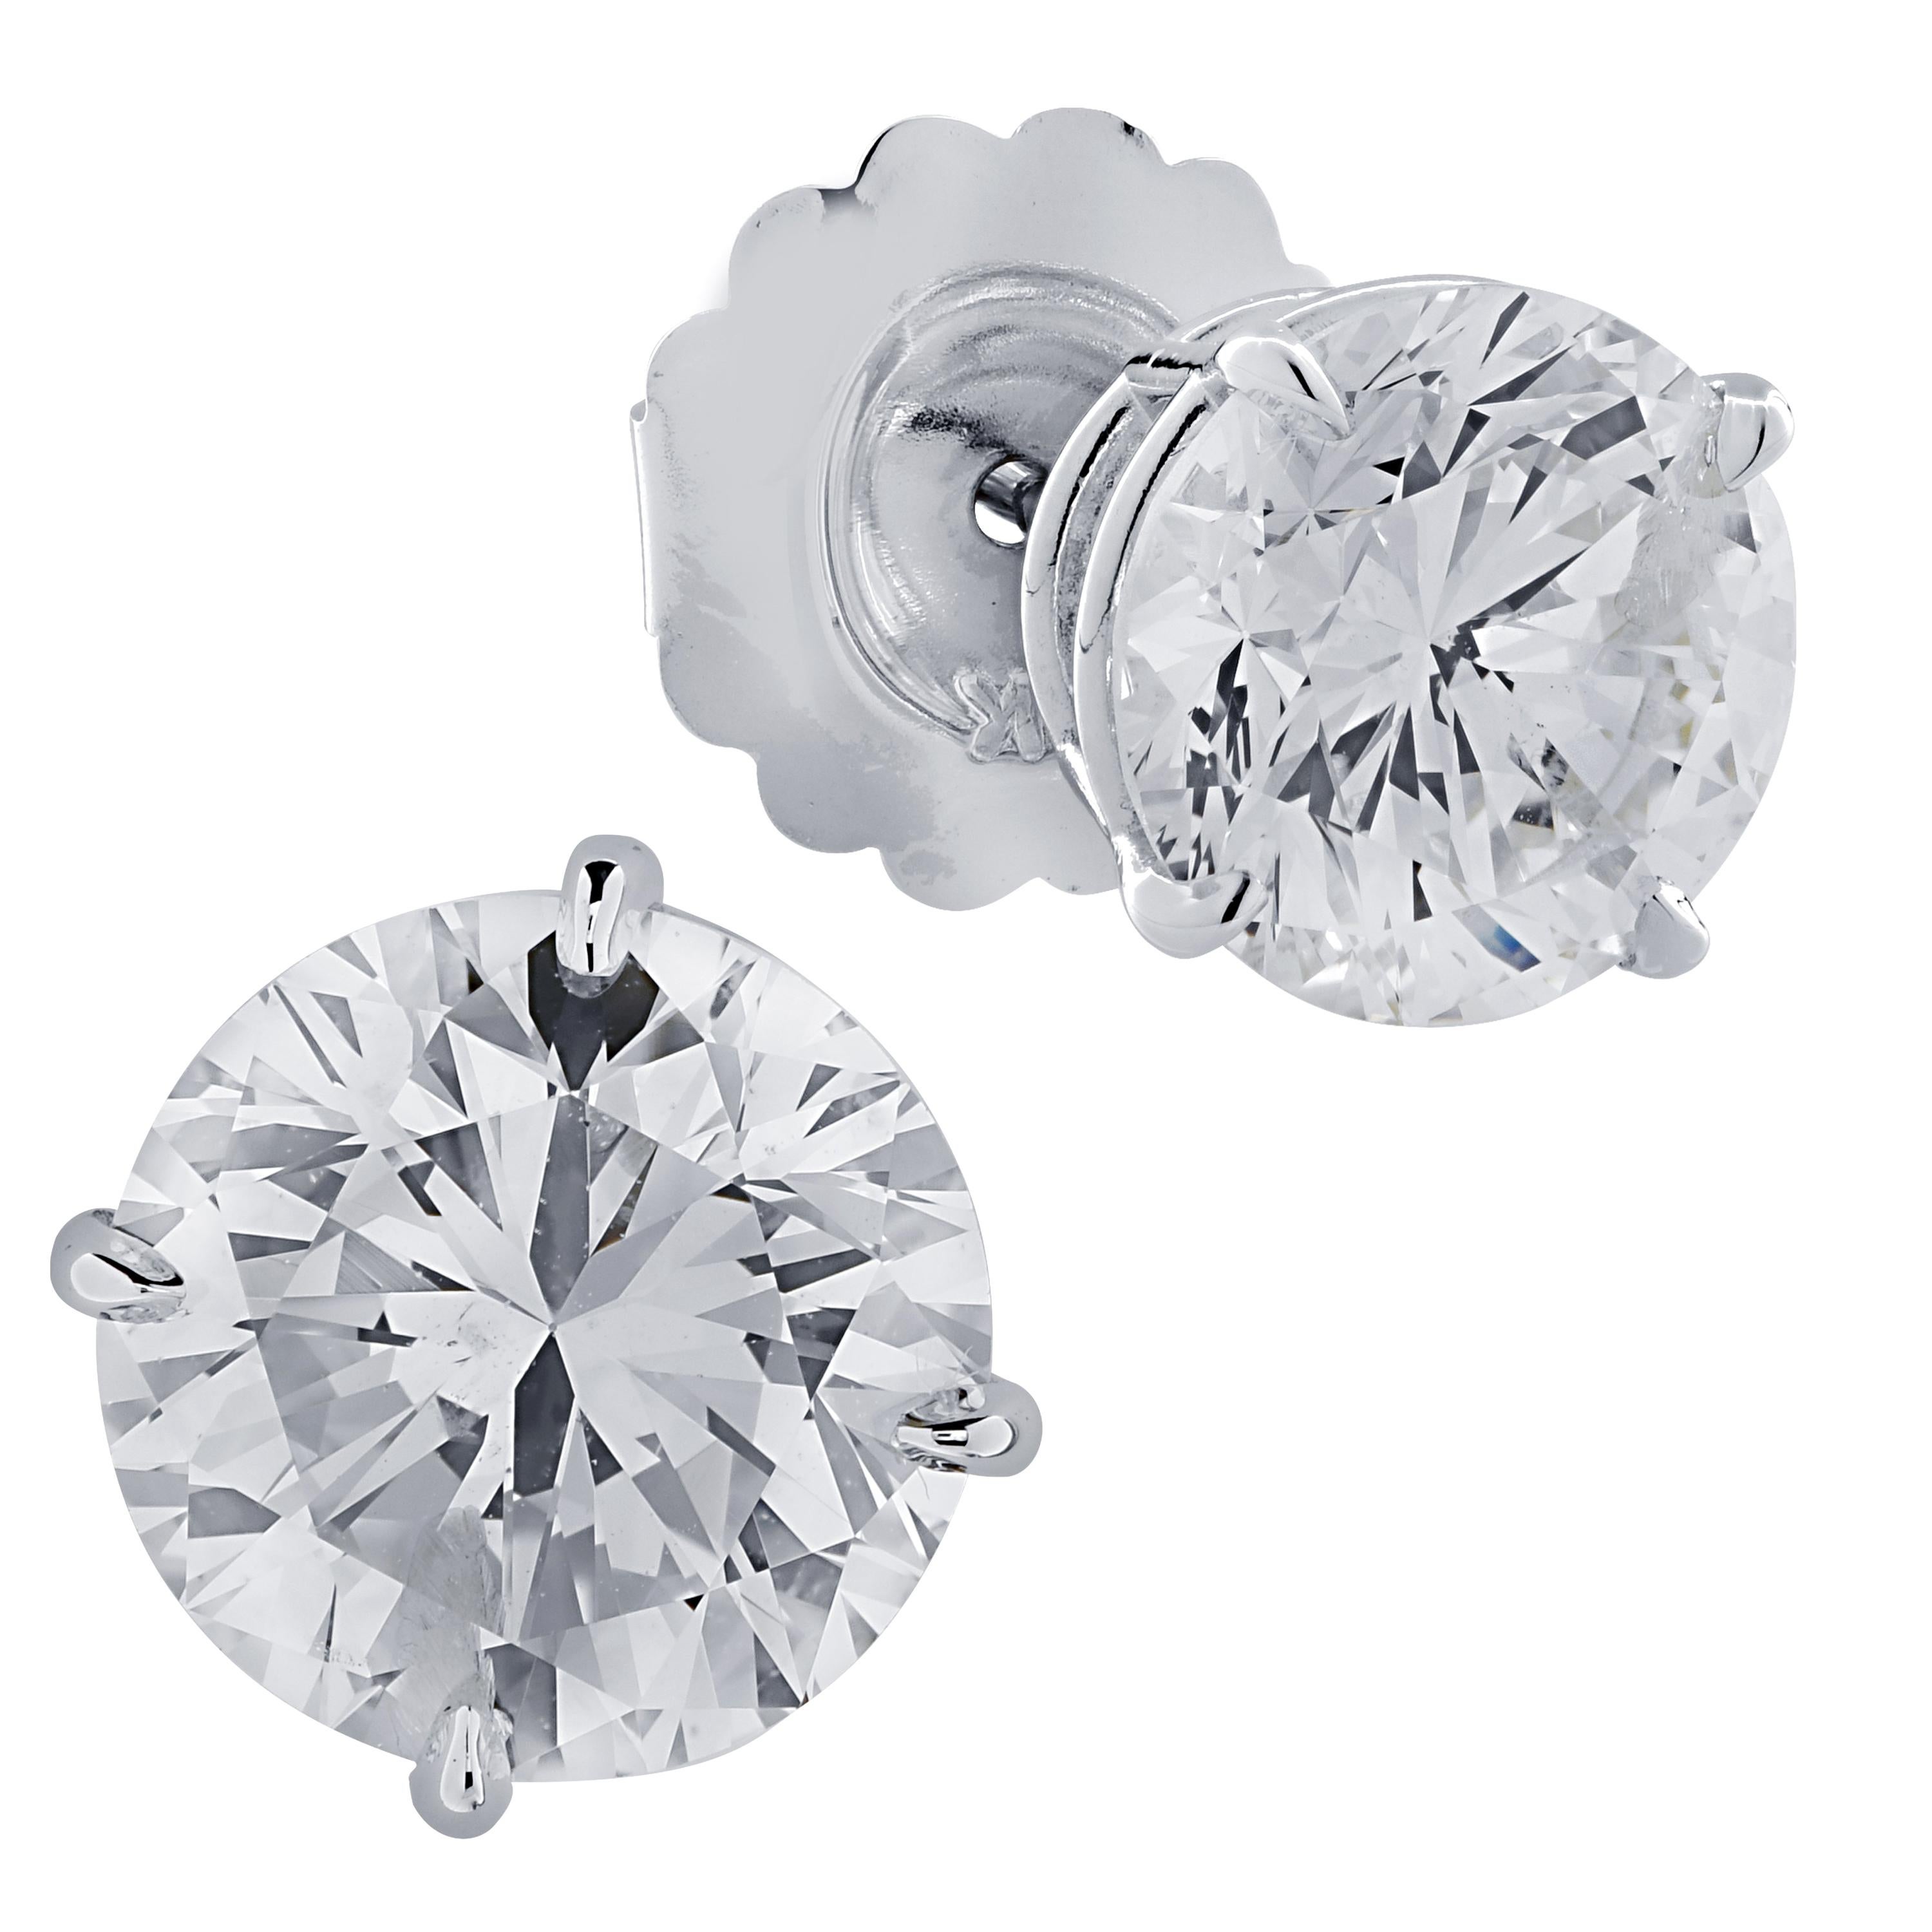 Stunning solitaire stud earrings crafted in 18 karat white gold, showcasing 2 round brilliant cut diamonds weighing 5.83 carats total, M color I1 clarity. These gorgeous earrings are classic and timelessly elegant.

Our pieces are all accompanied by